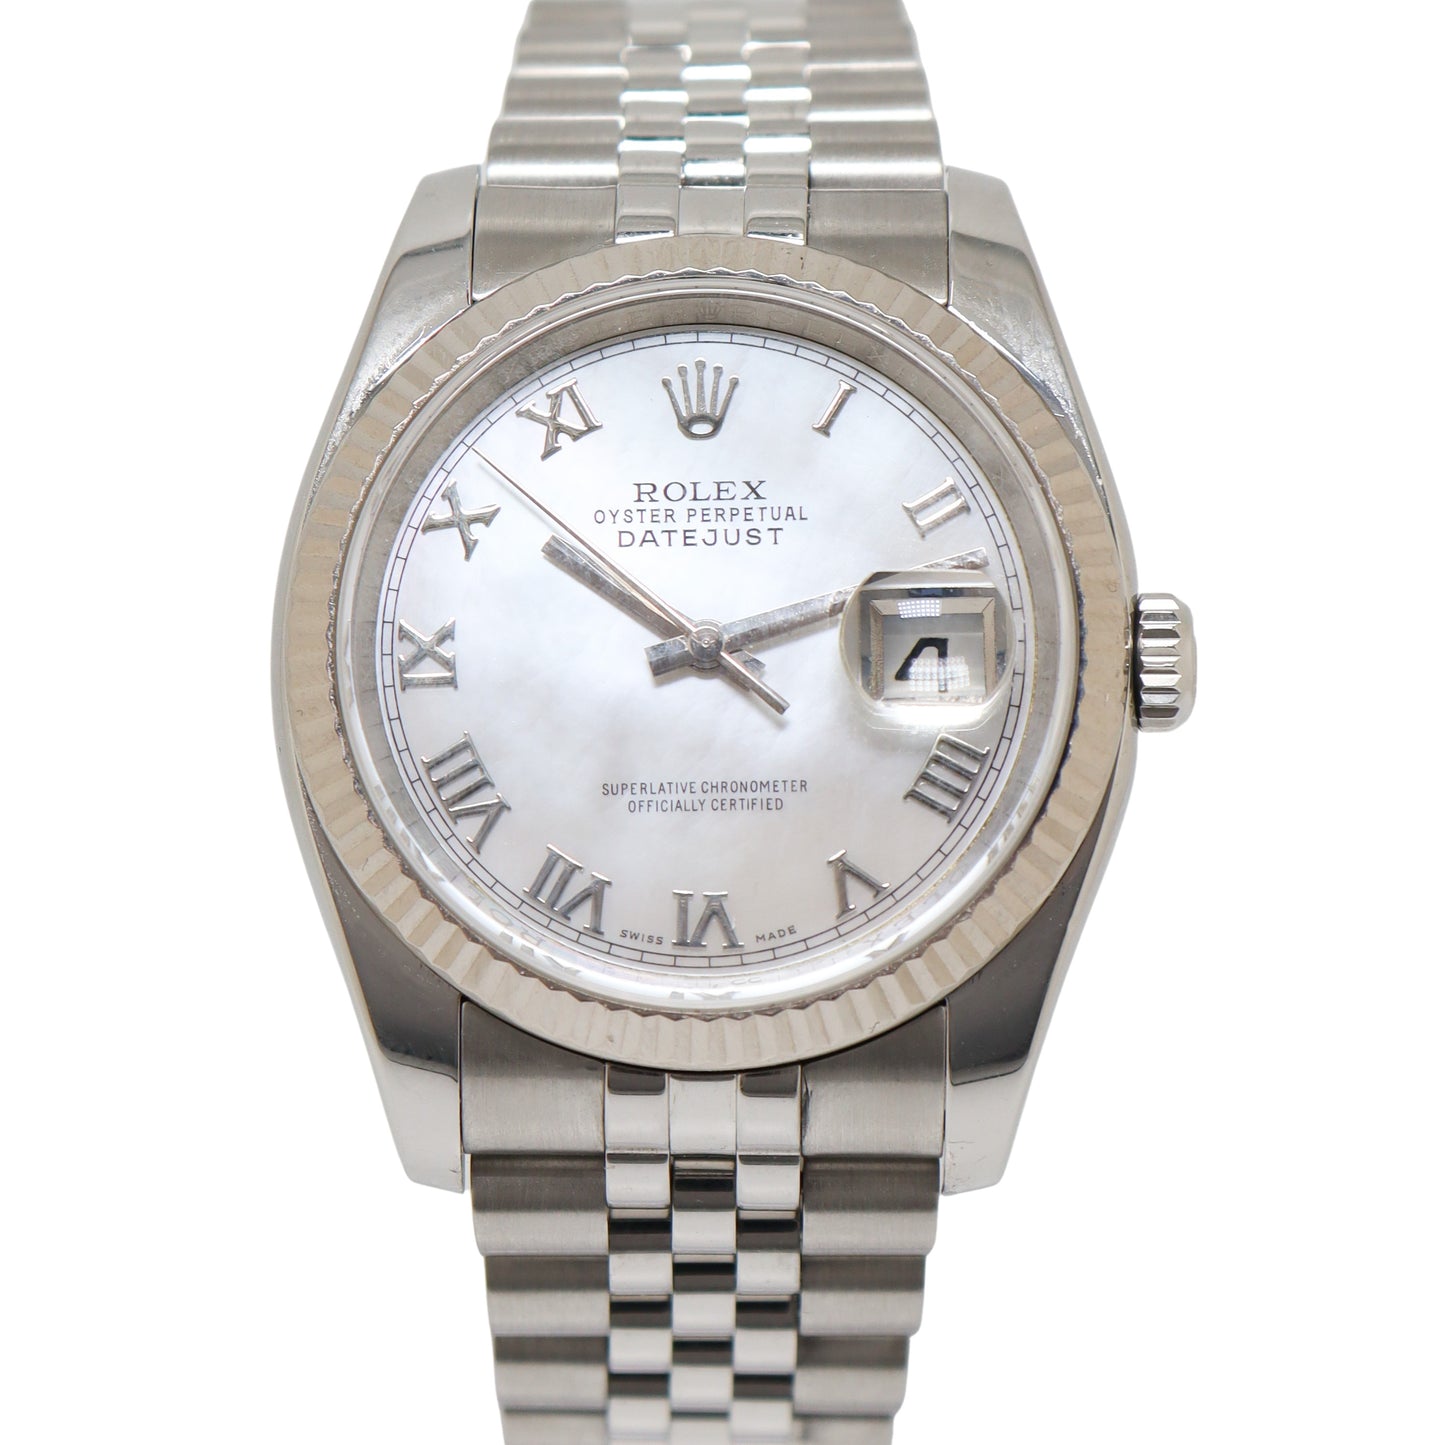 Rolex Datejust Two Tone White Gold & Steel 36mm White MOP Roman Dial Watch Reference#: 126234 - Happy Jewelers Fine Jewelry Lifetime Warranty